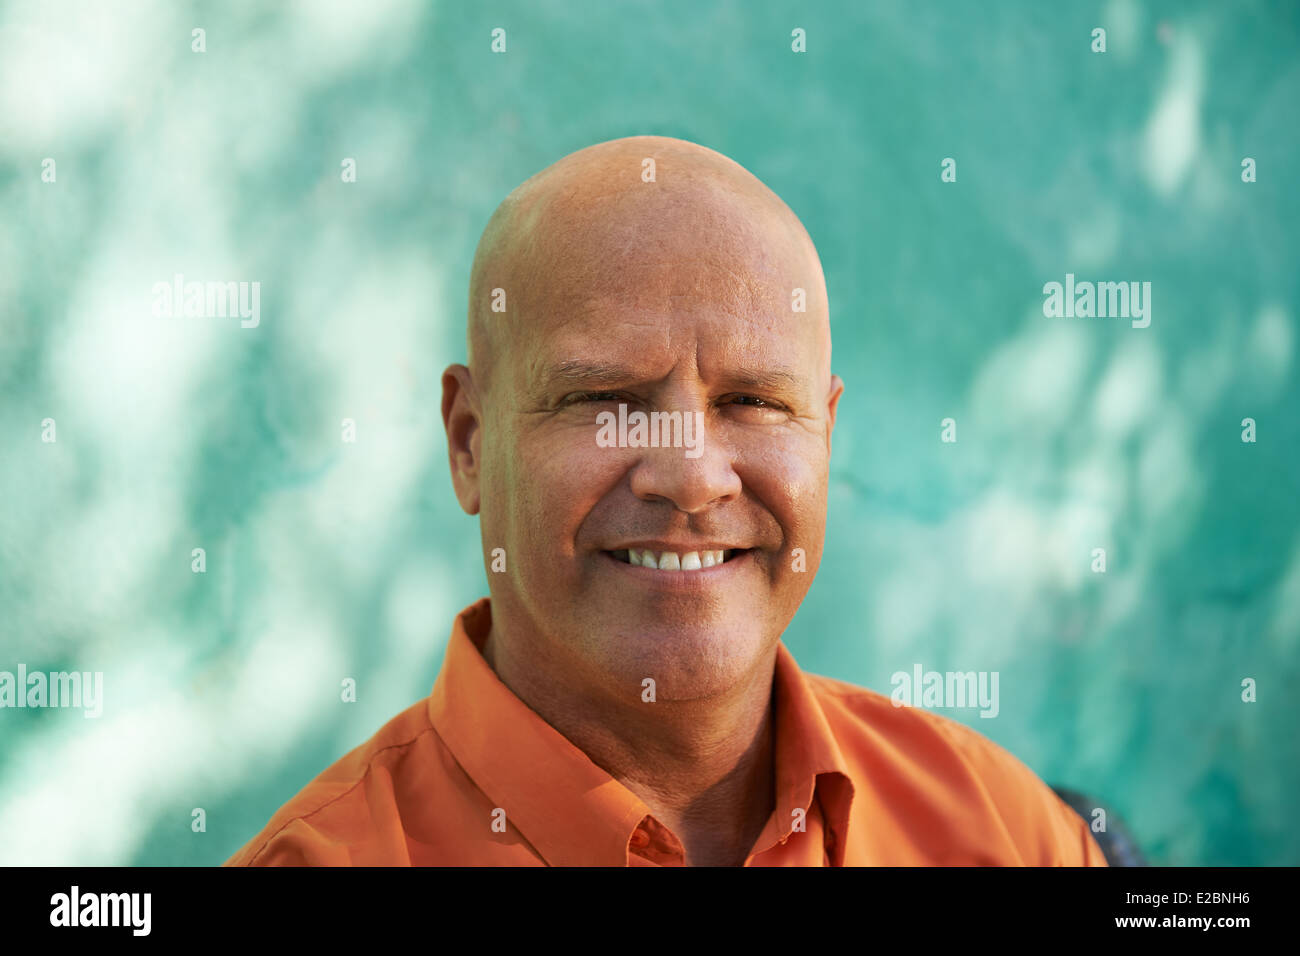 Portrait of mature caucasian man with orange shirt sitting in park and looking at camera with happy expression Stock Photo